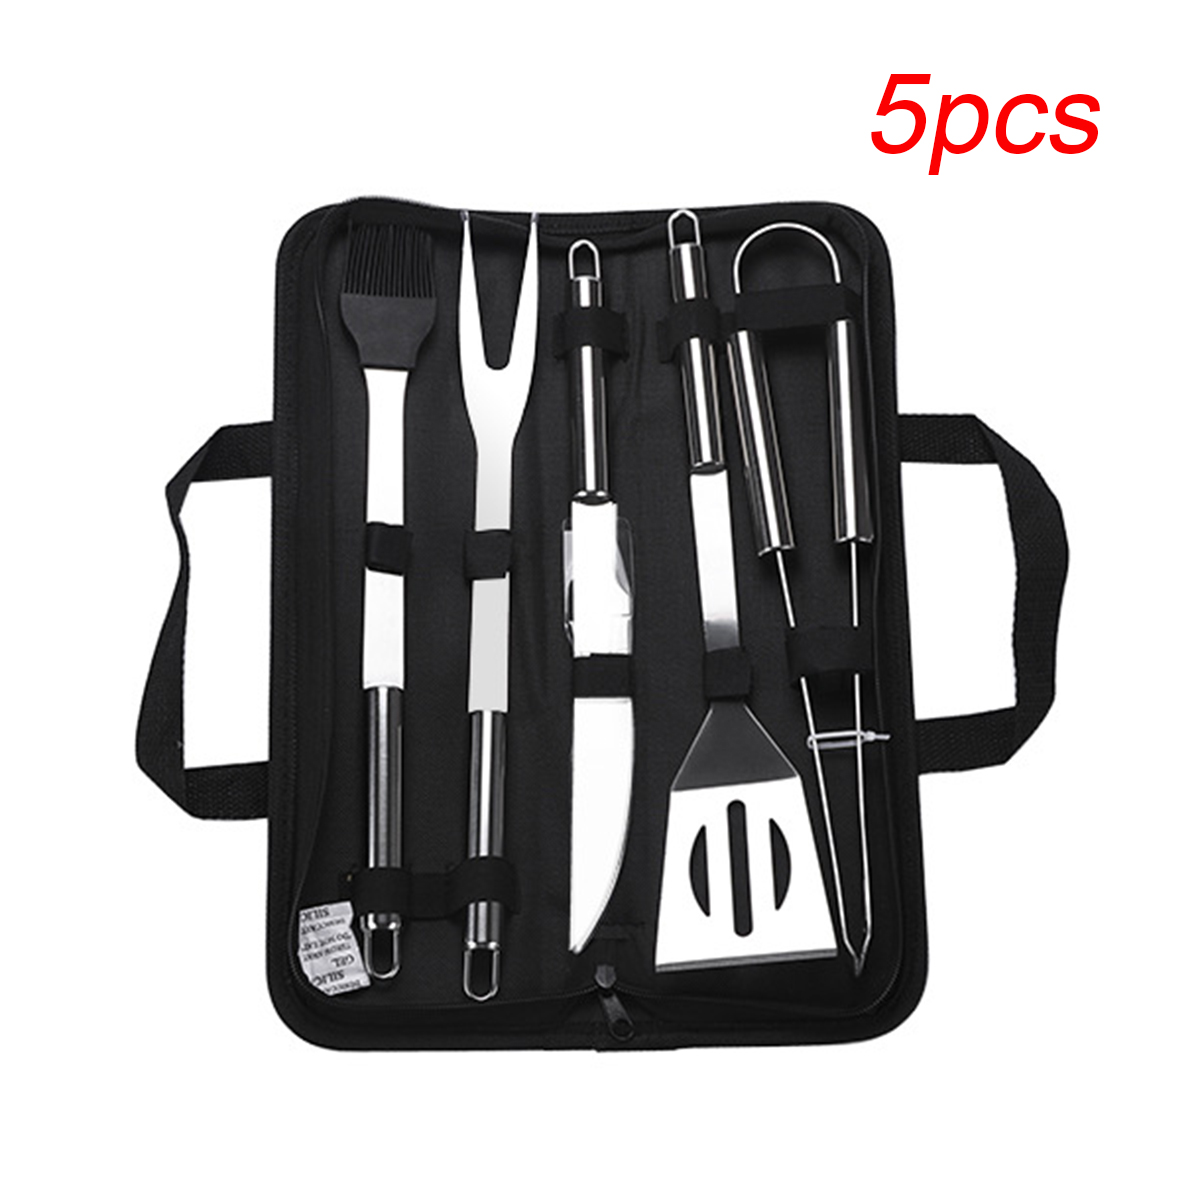 Stainless-Steel-BBQ-Tools-Set-Barbecue-Grilling-Utensil-Accessories-Camping-Outdoor-Cooking-1676473-7